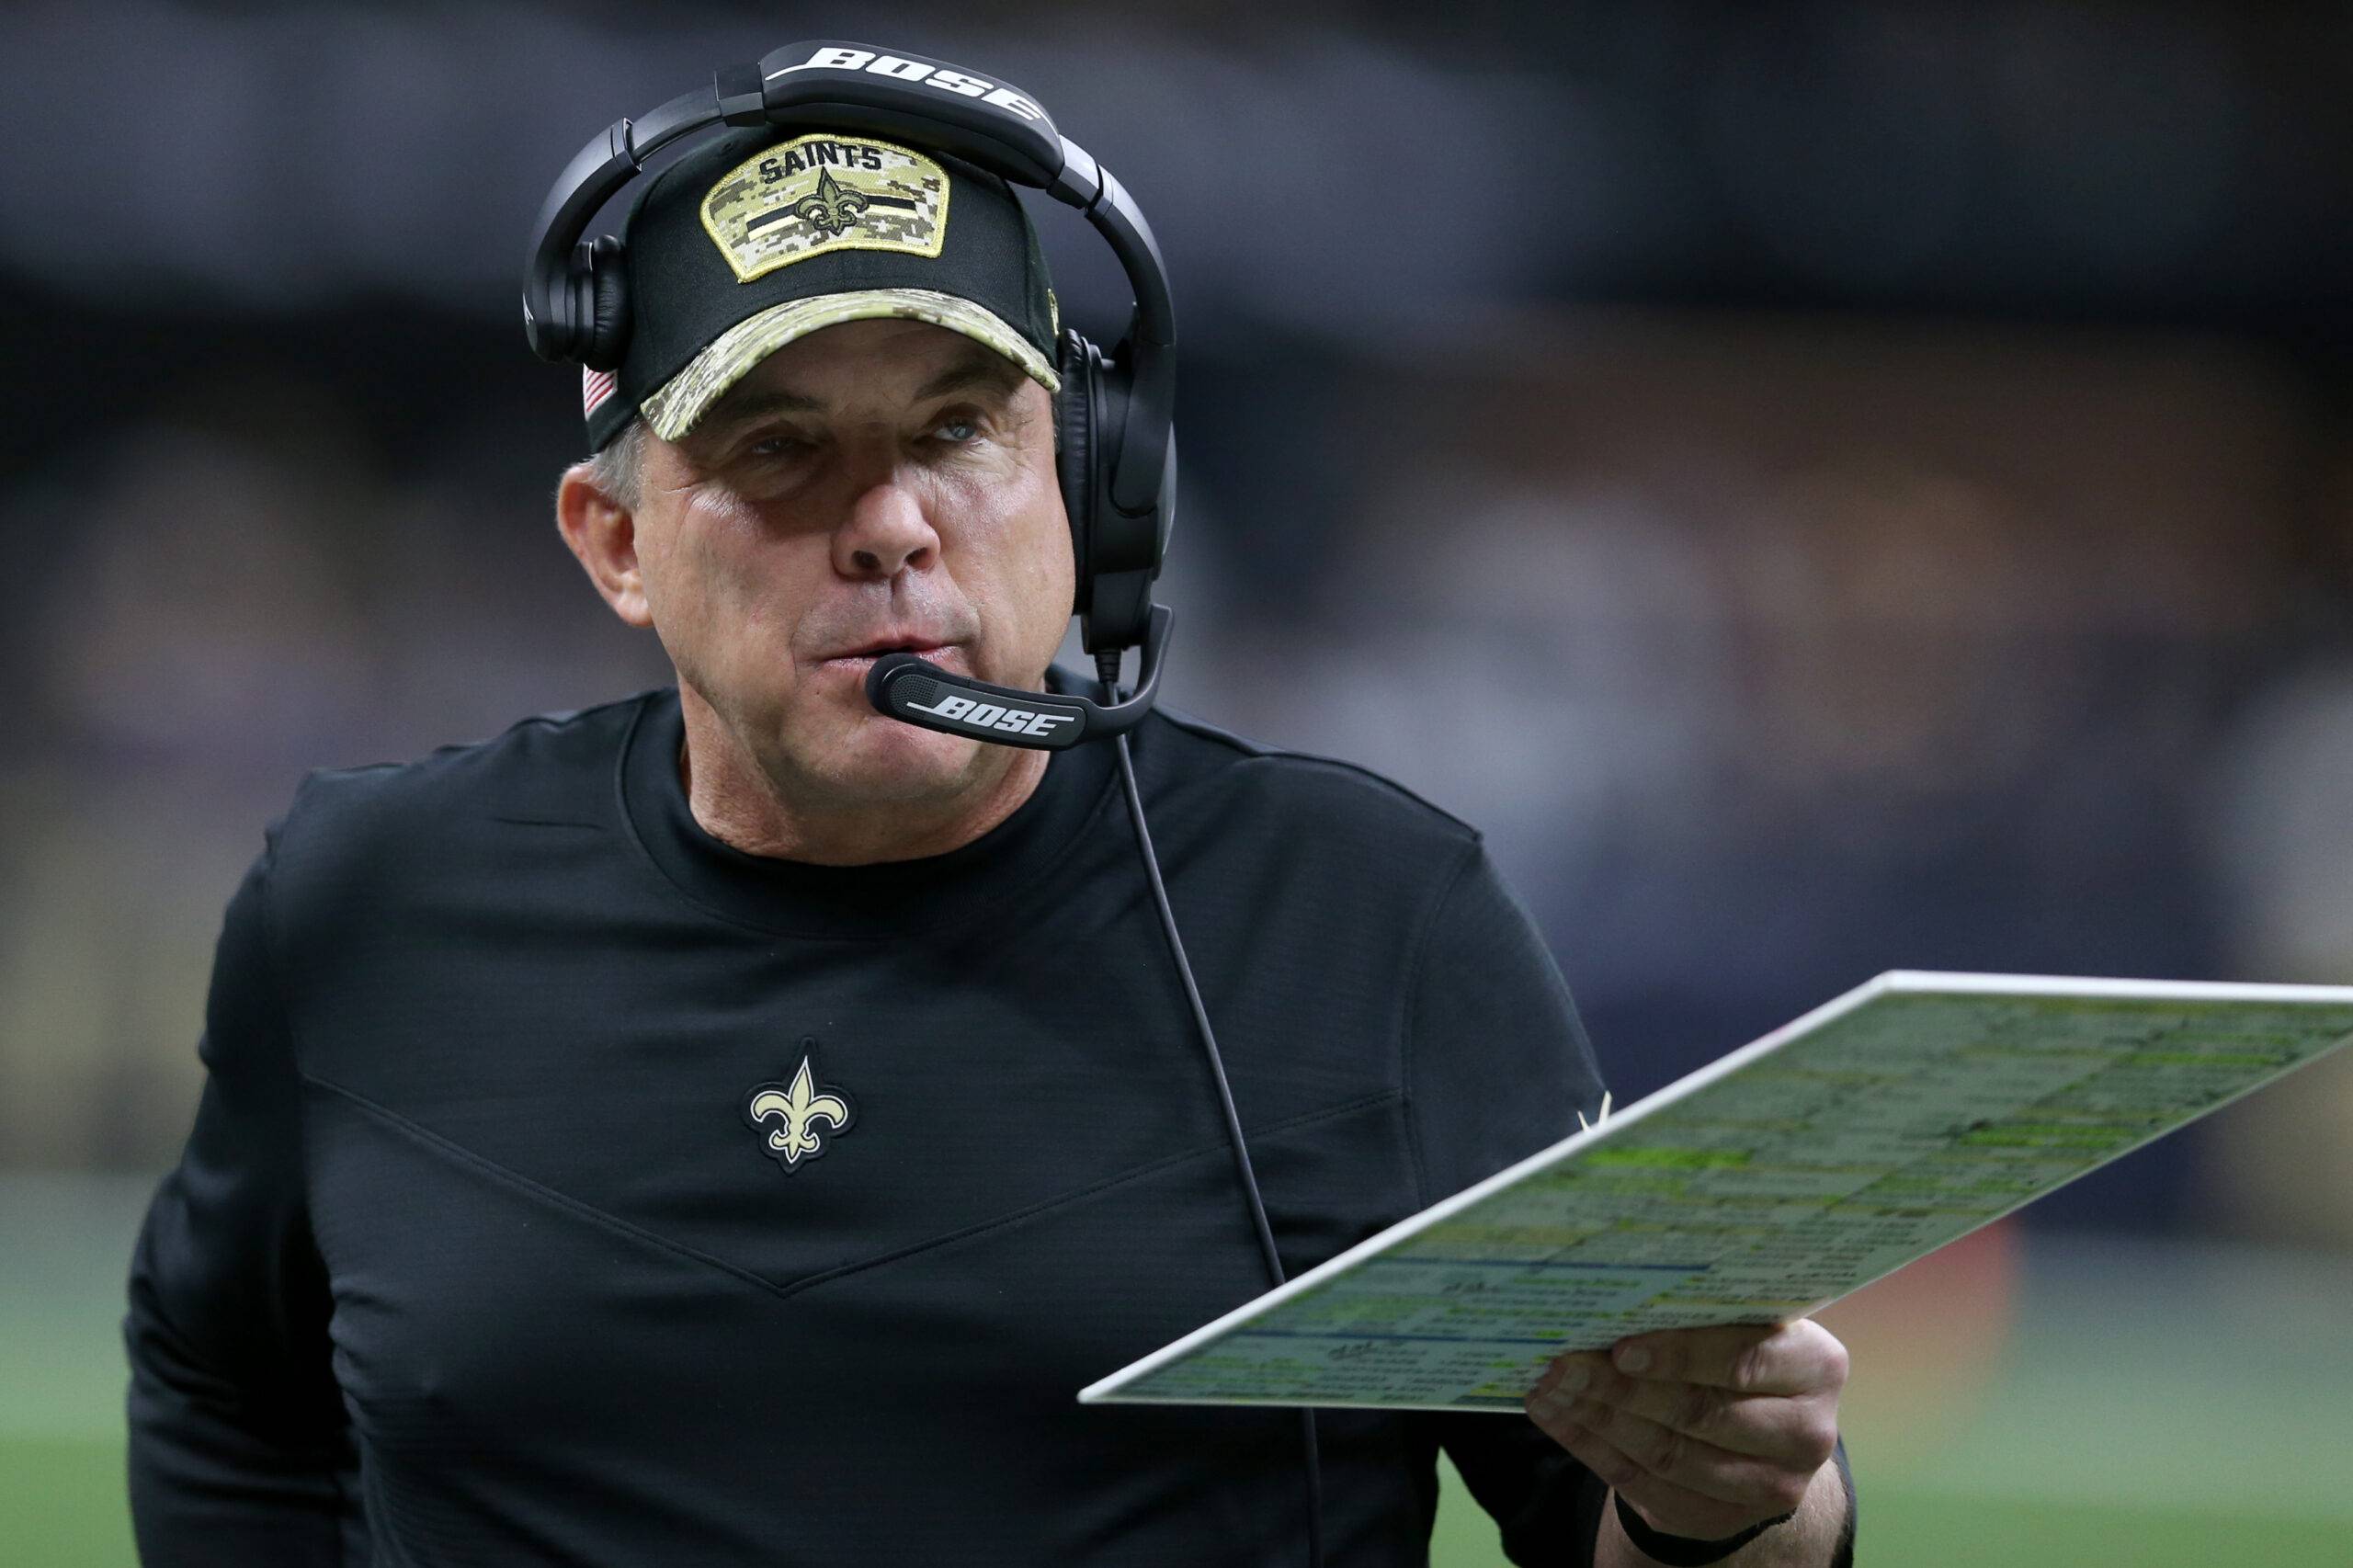 Sean Payton of the New Orleans Saints scaled